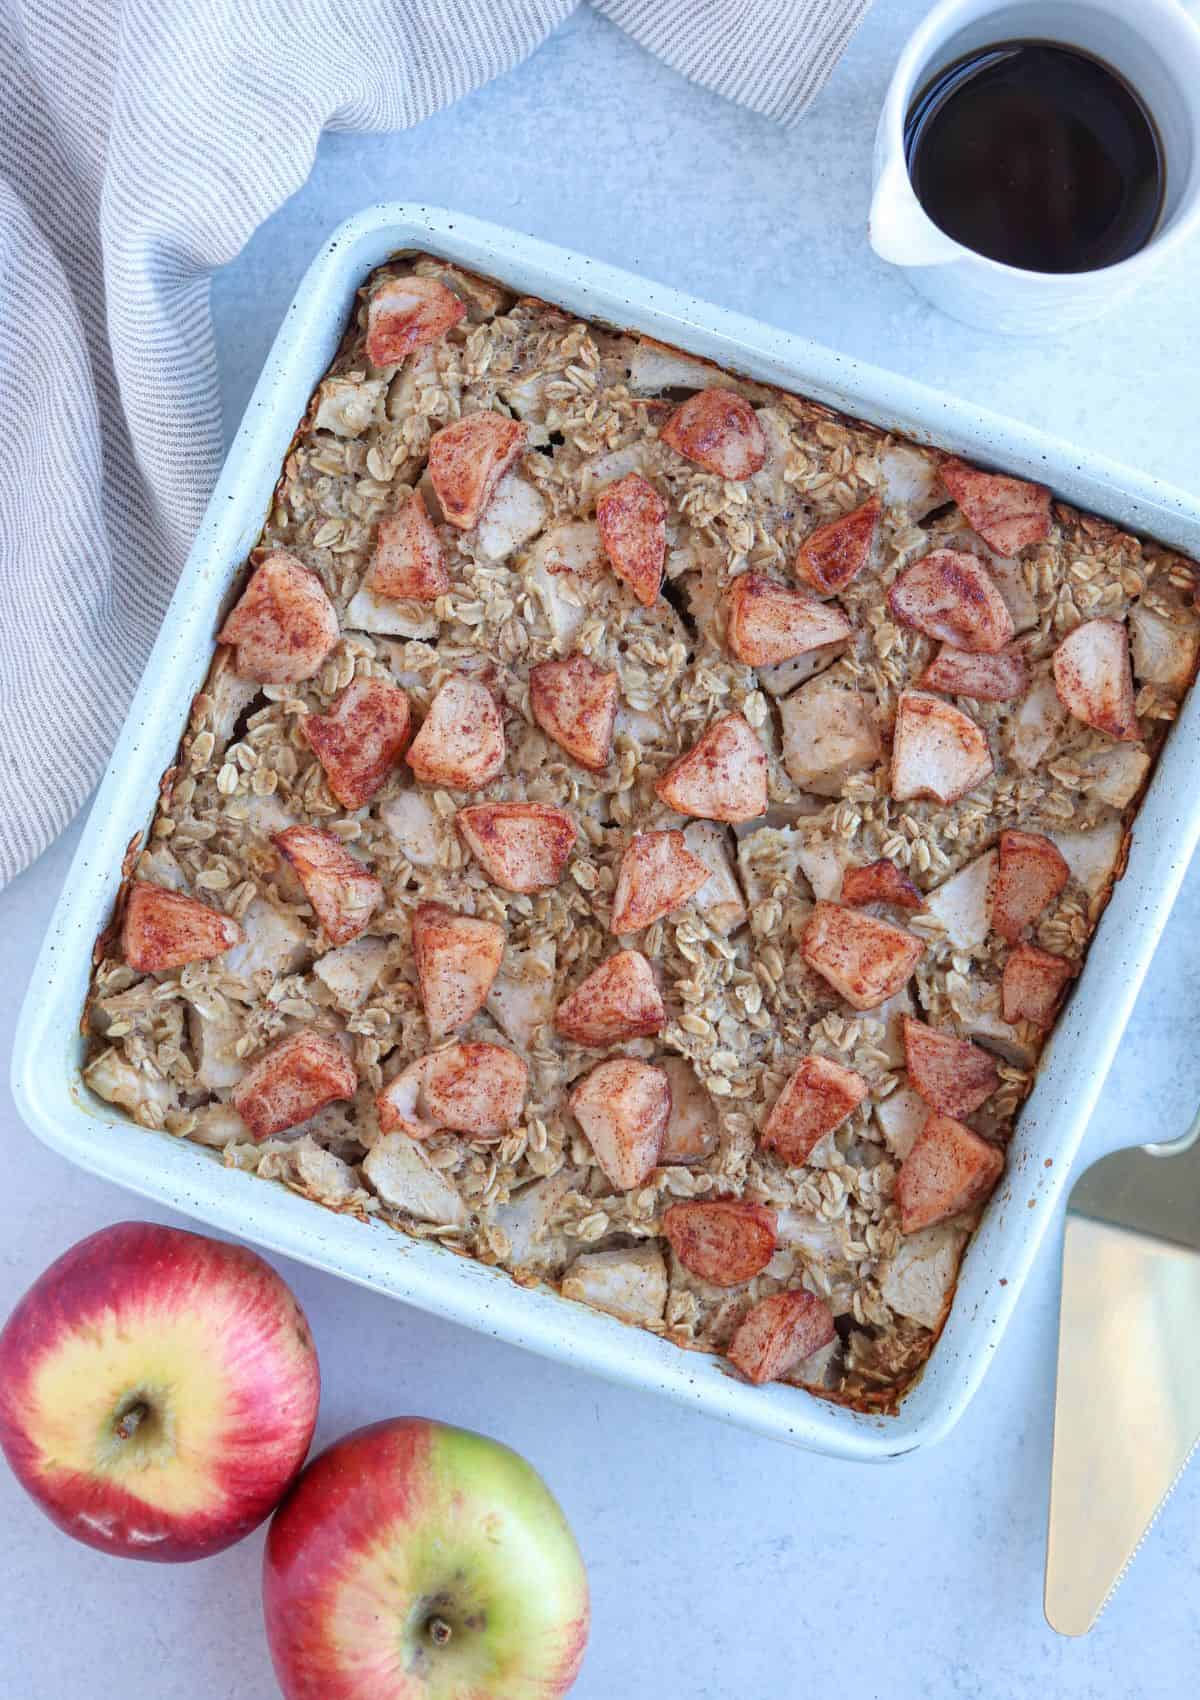 apple pie baked oatmeal in a teal square baking pan, after baking.